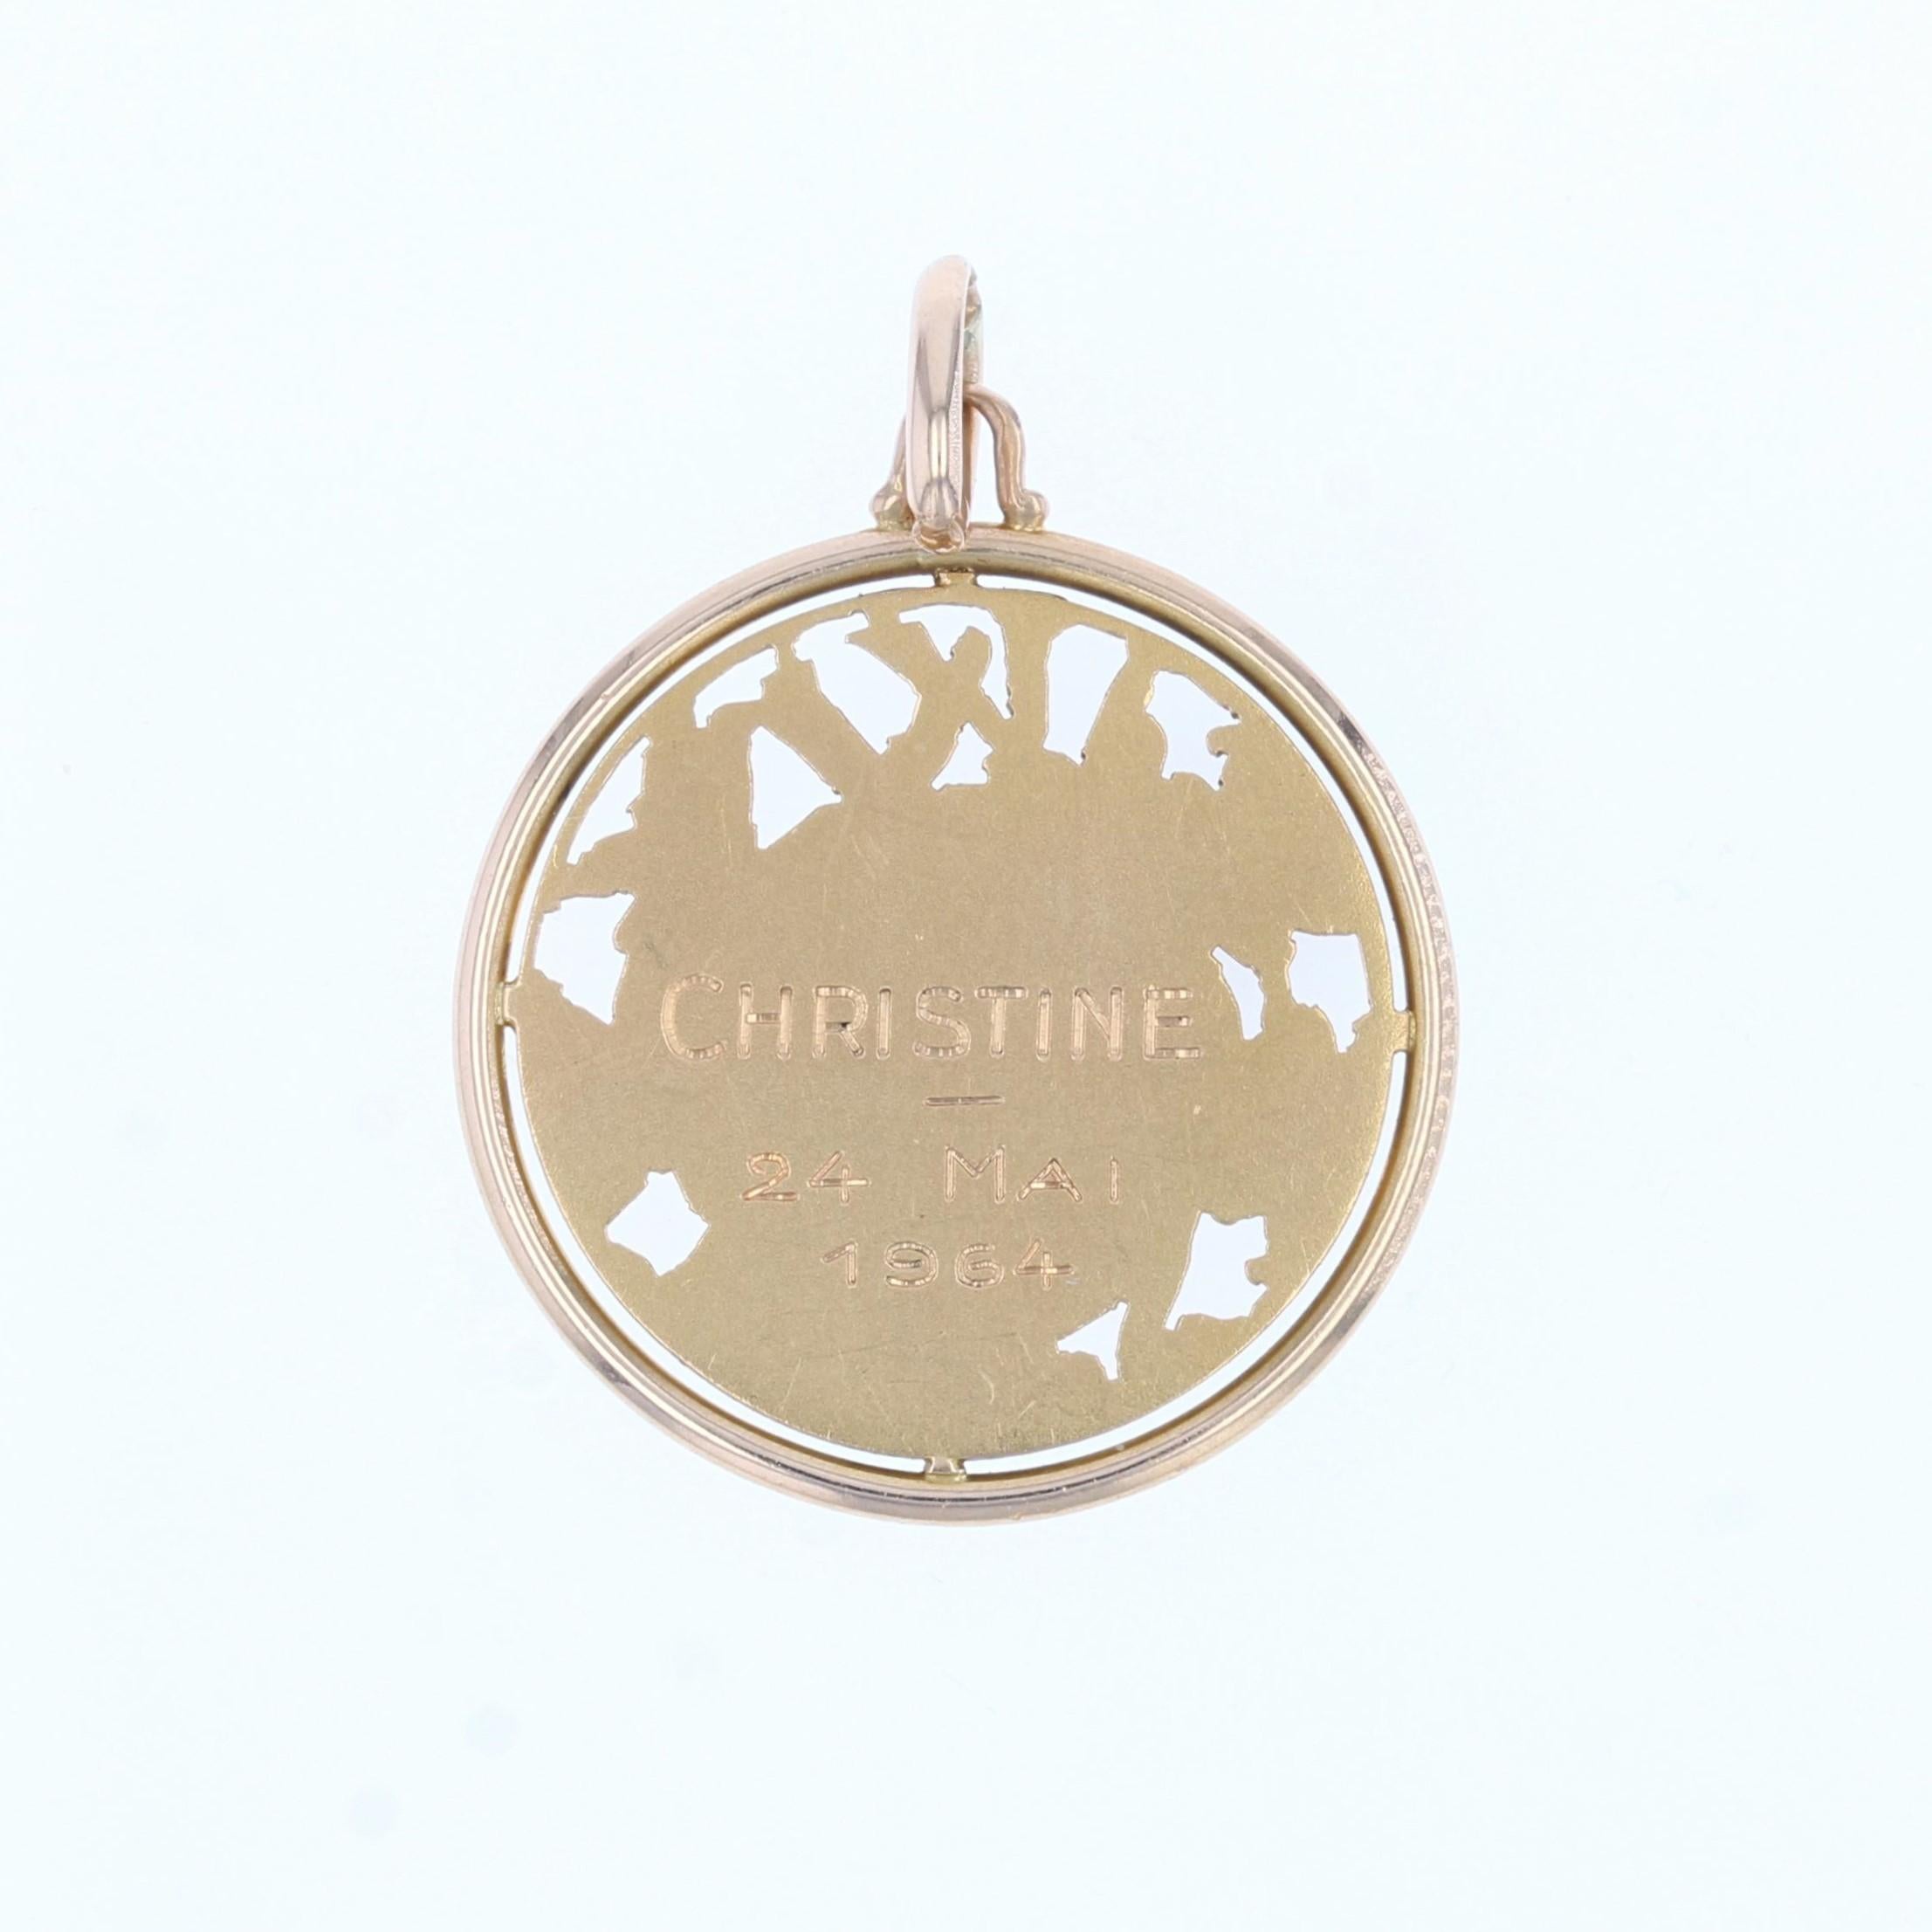 Medal in 18 karat rose gold, eagle head hallmark.
This round medal in rose gold represents the Virgin haloed in a rose gold plant and openwork pattern. This religious pendant is signed Monier and engraved on the back 